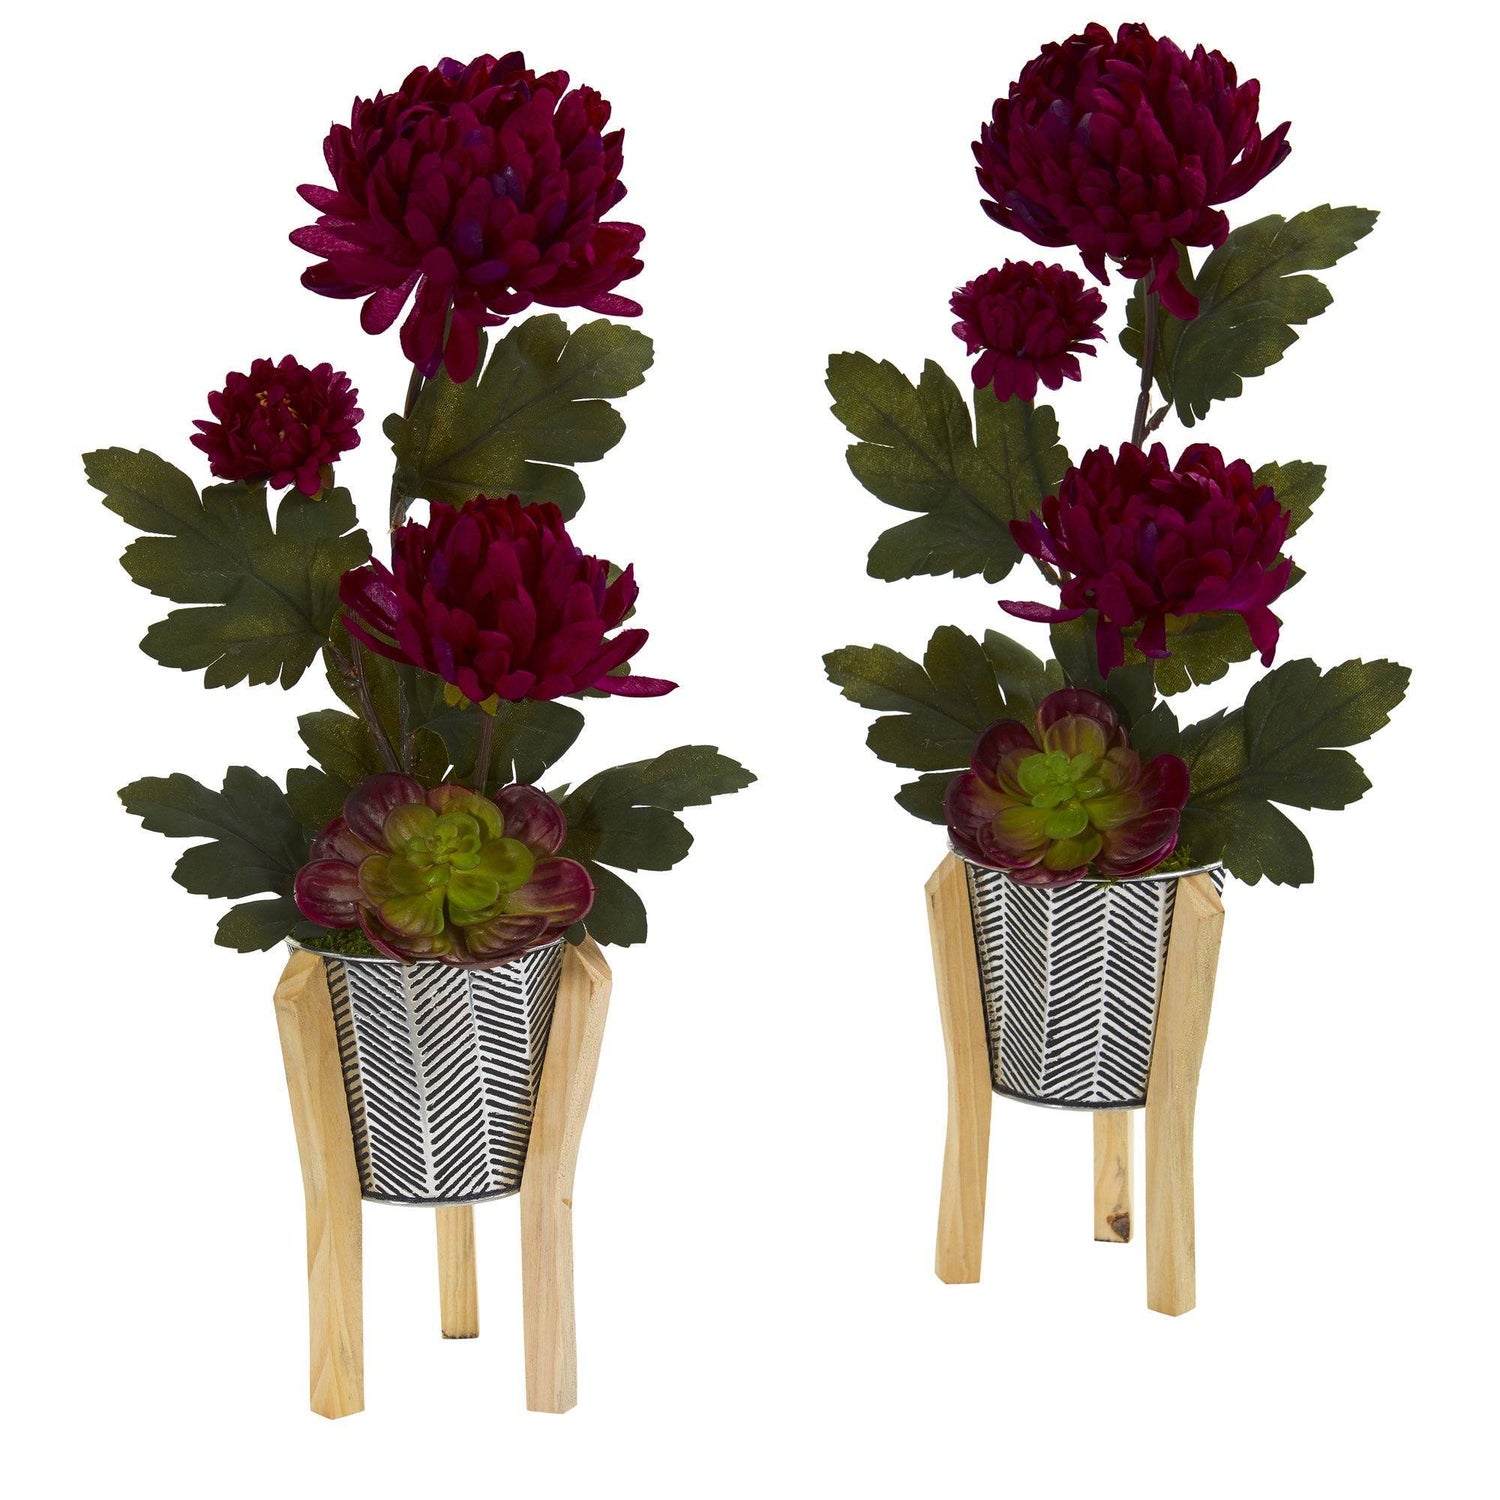 20” Mum and Succulent Artificial Arrangement in Tin Planter with Legs (Set of 2)